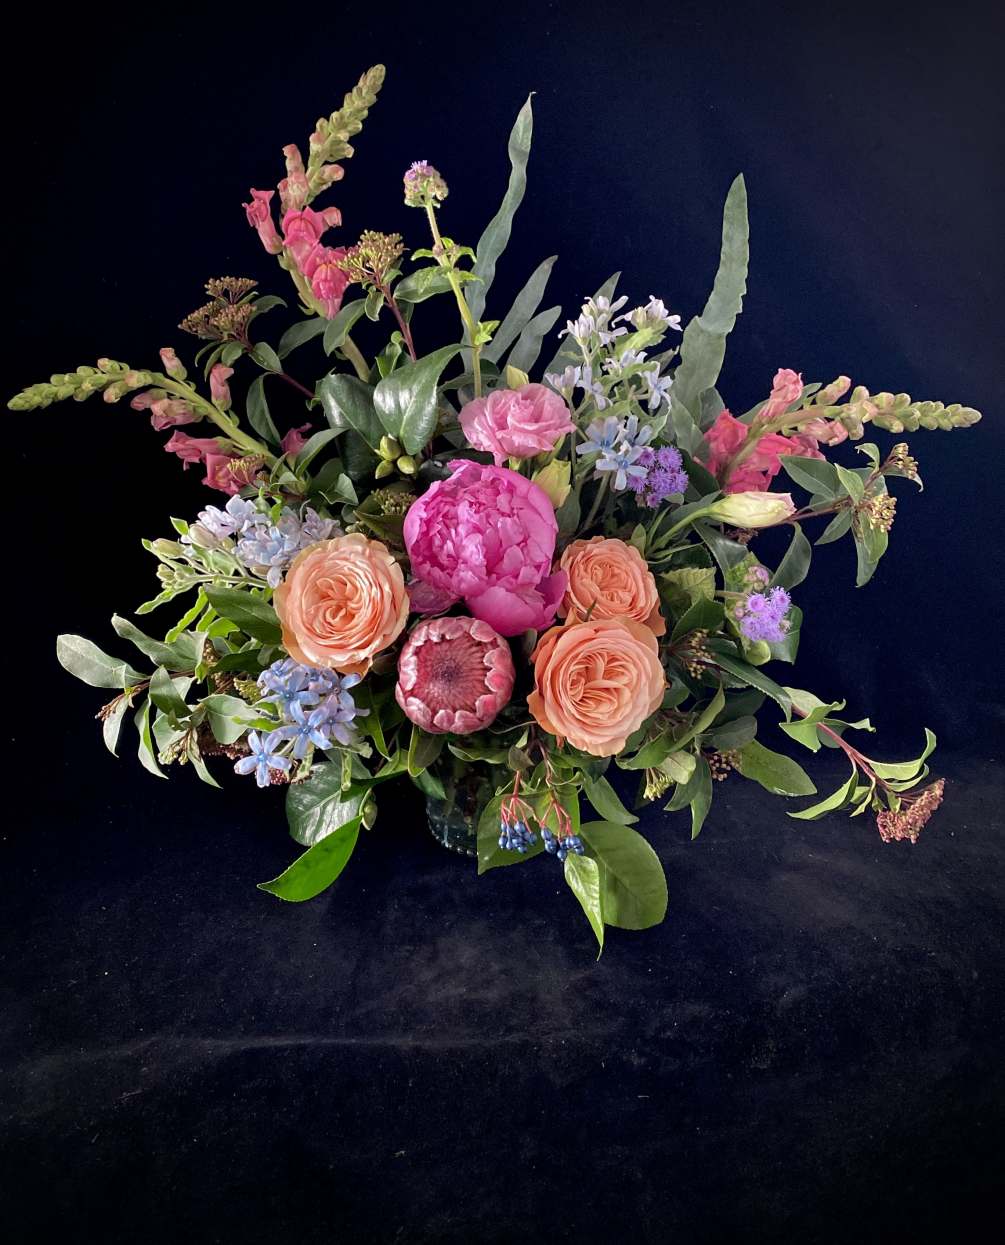 Protea, stunning peony-like Garden Roses, and locally grown unique floral accents create